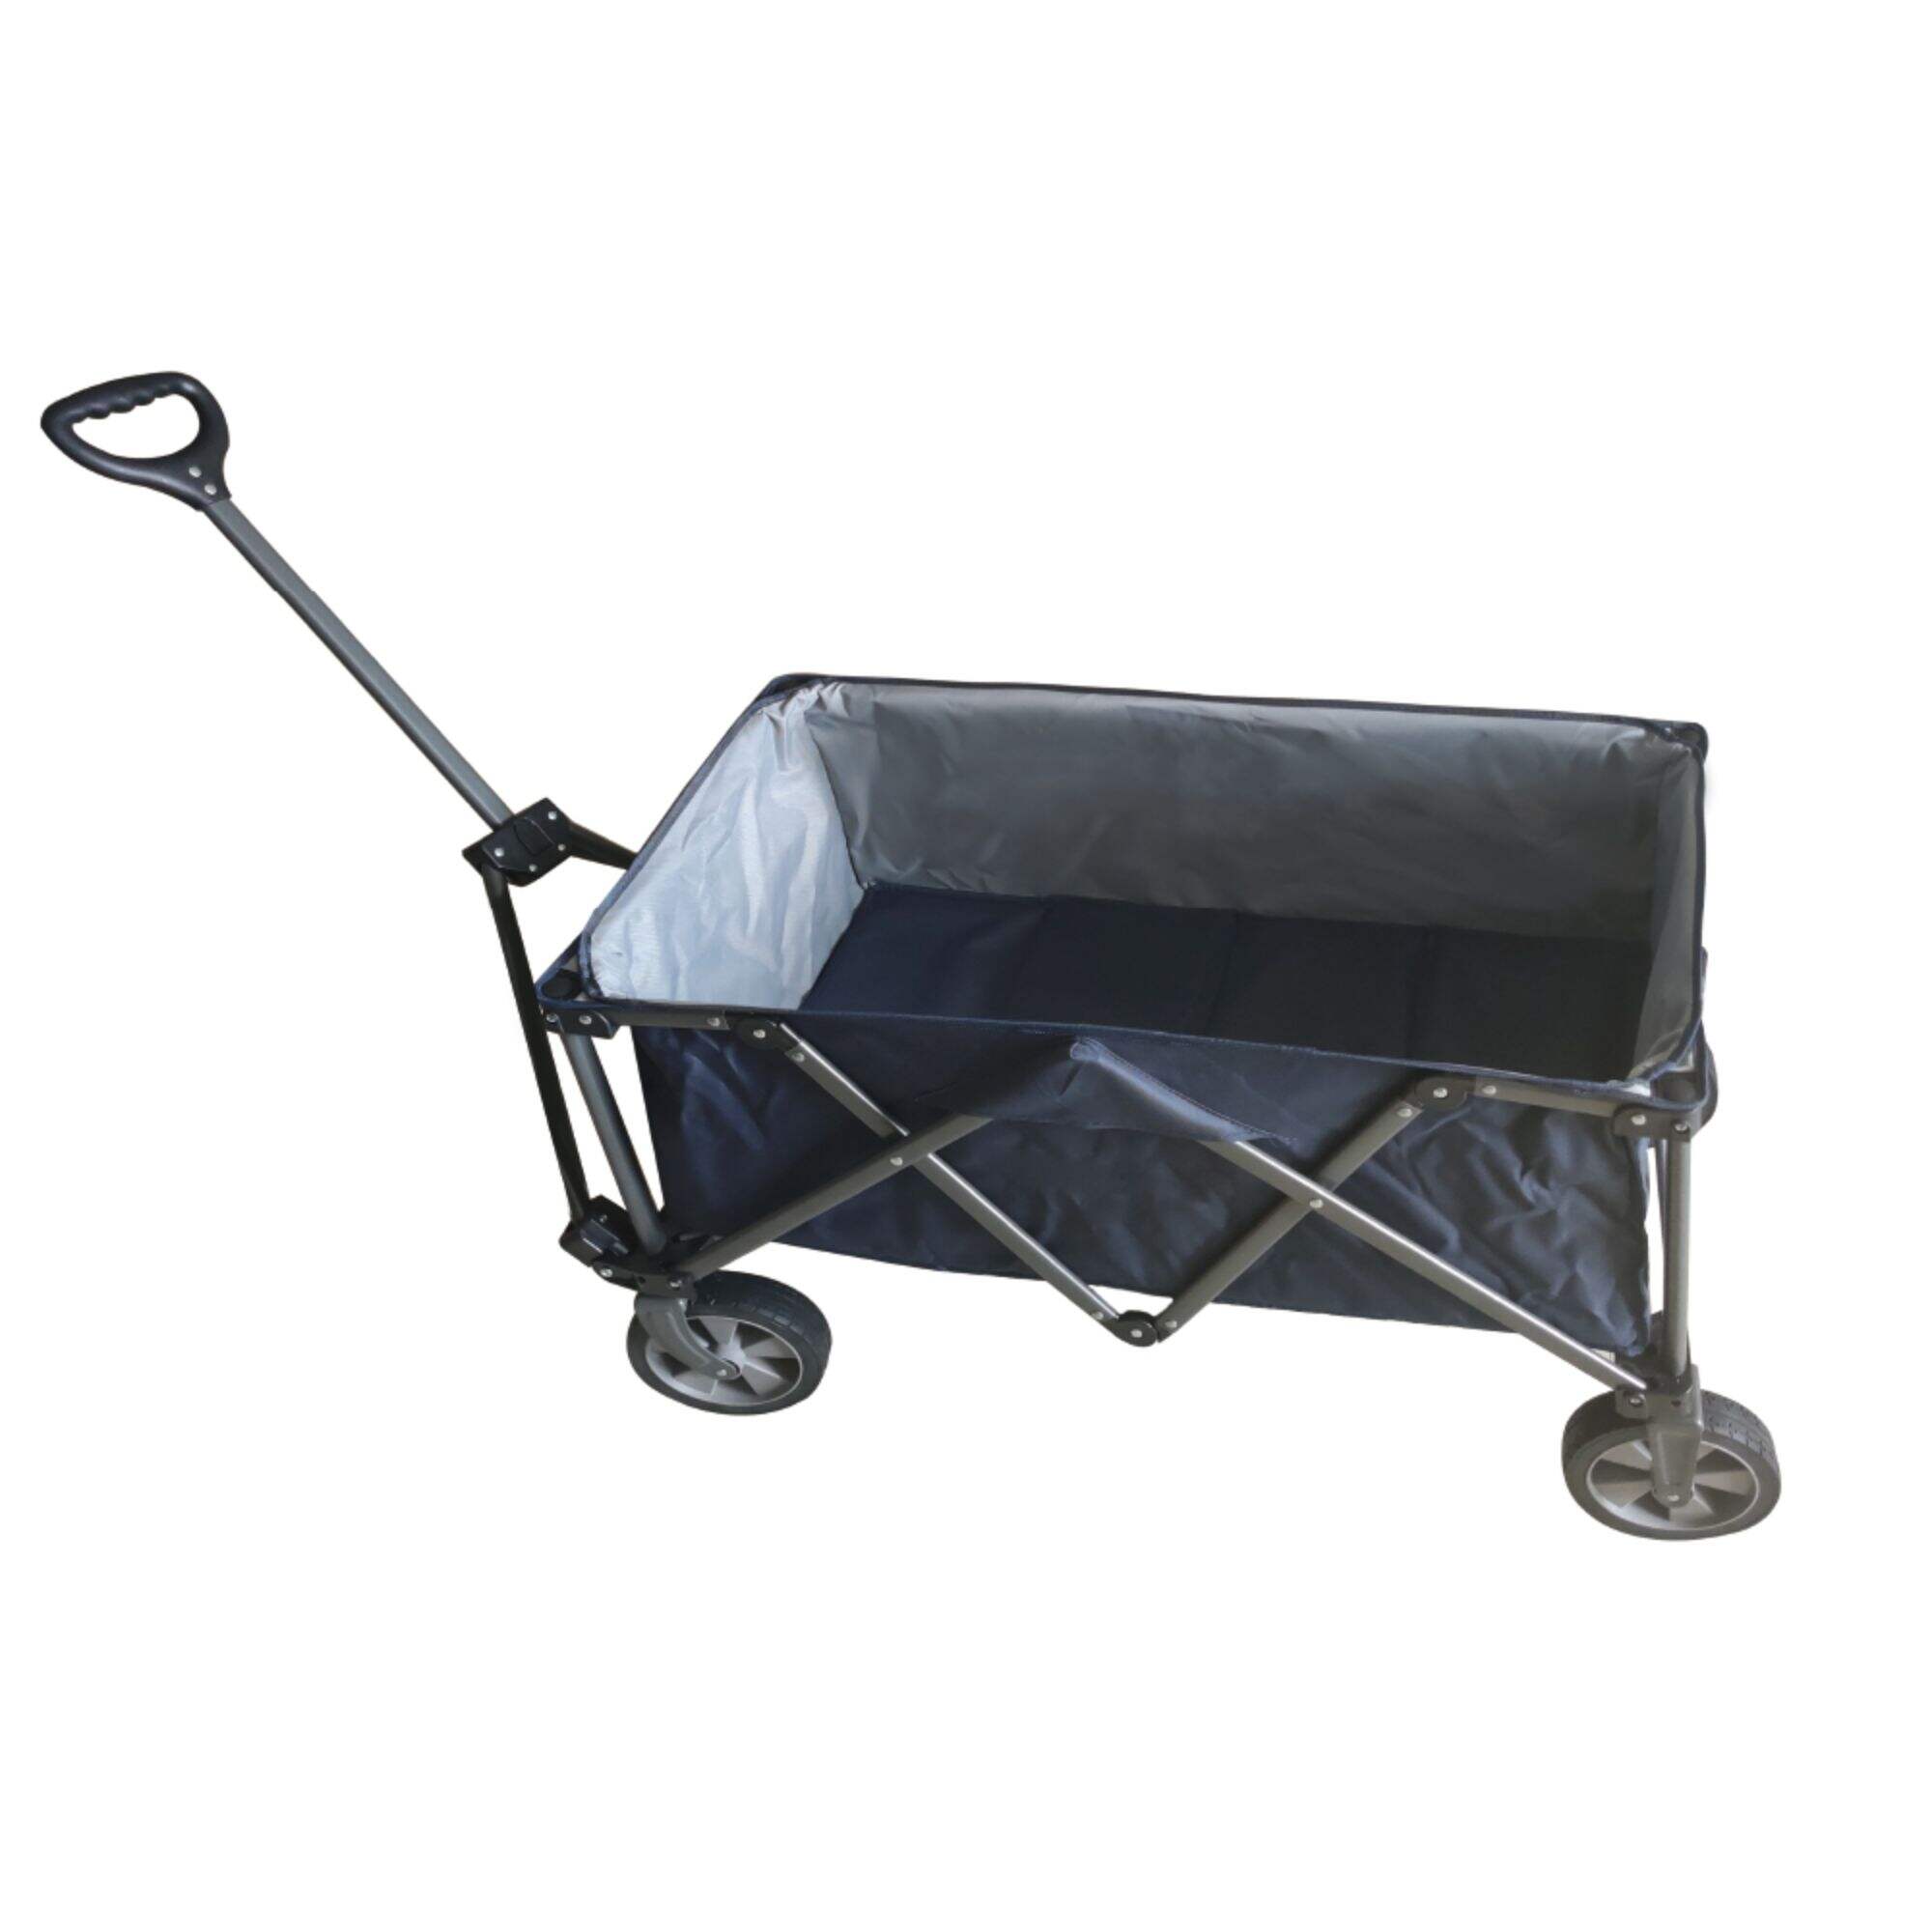 GT1816 Folding Wagon, Collapsible Camping Wagon Cart, for Outdoor